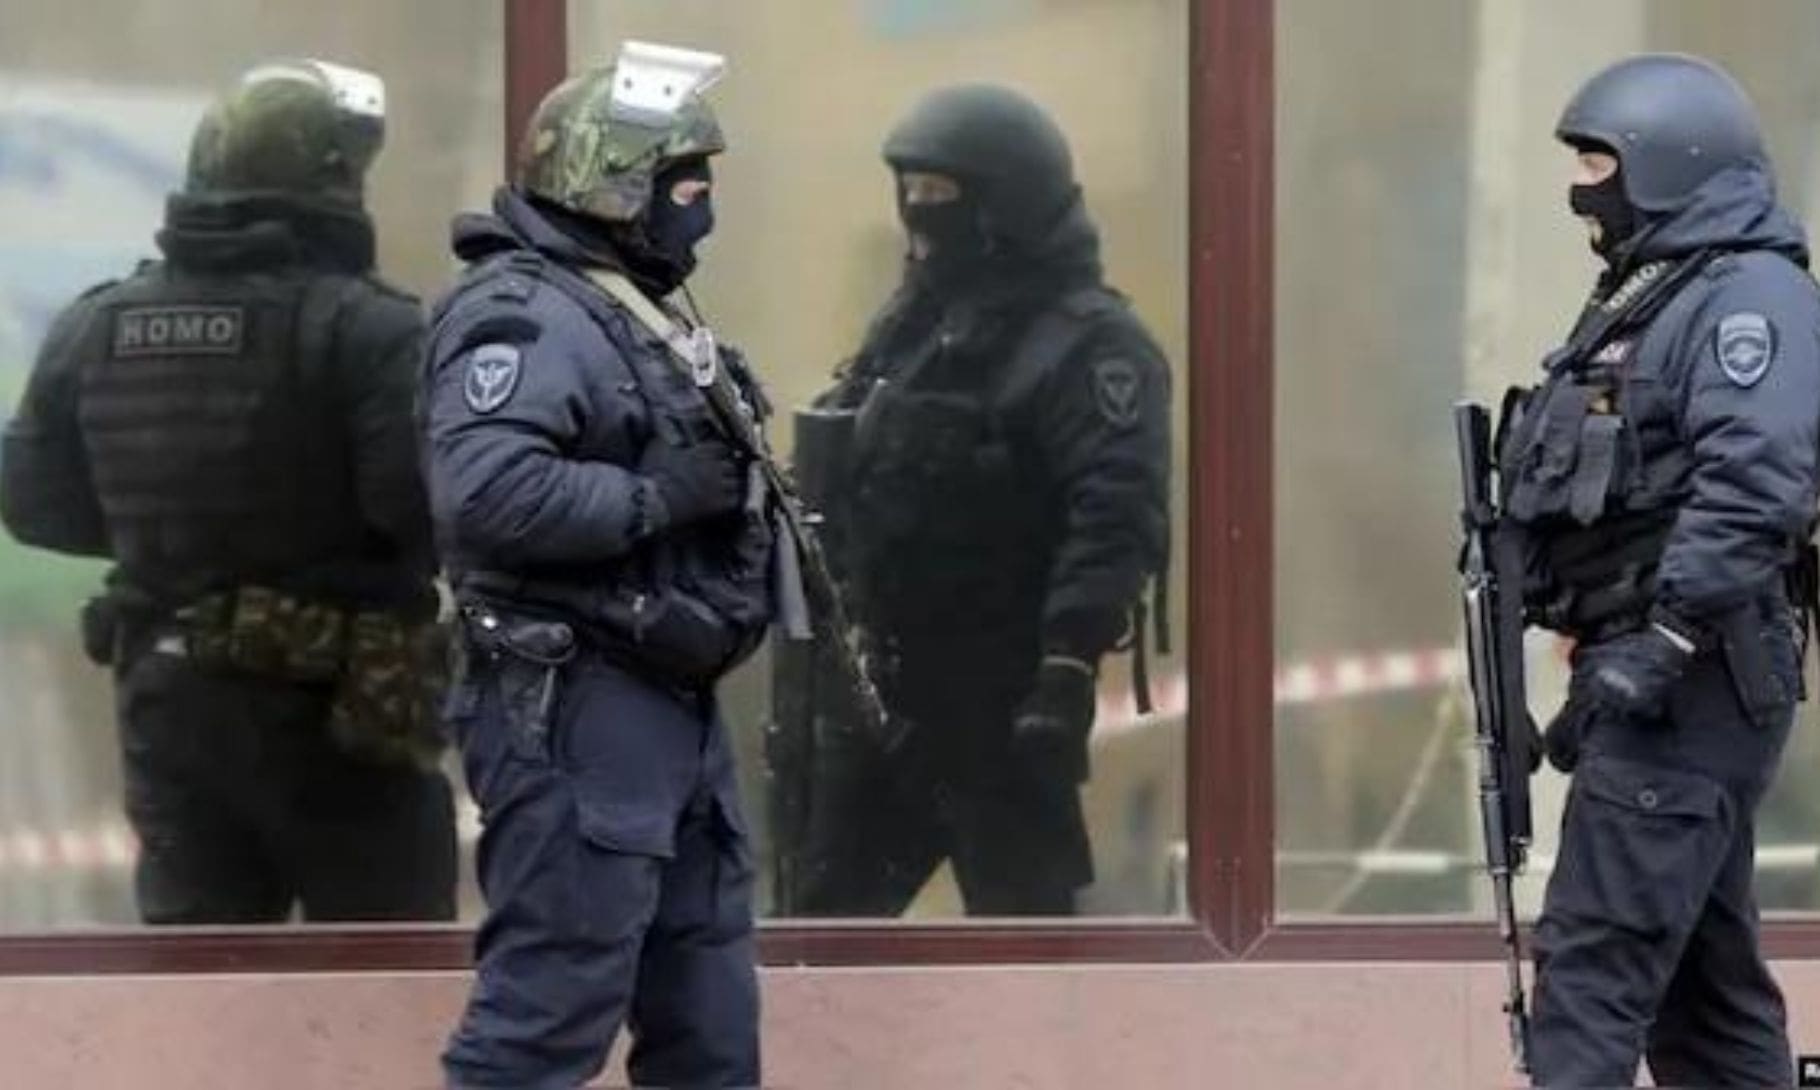 3 Days Of Mourning After Orthodox Church Attack In Russia